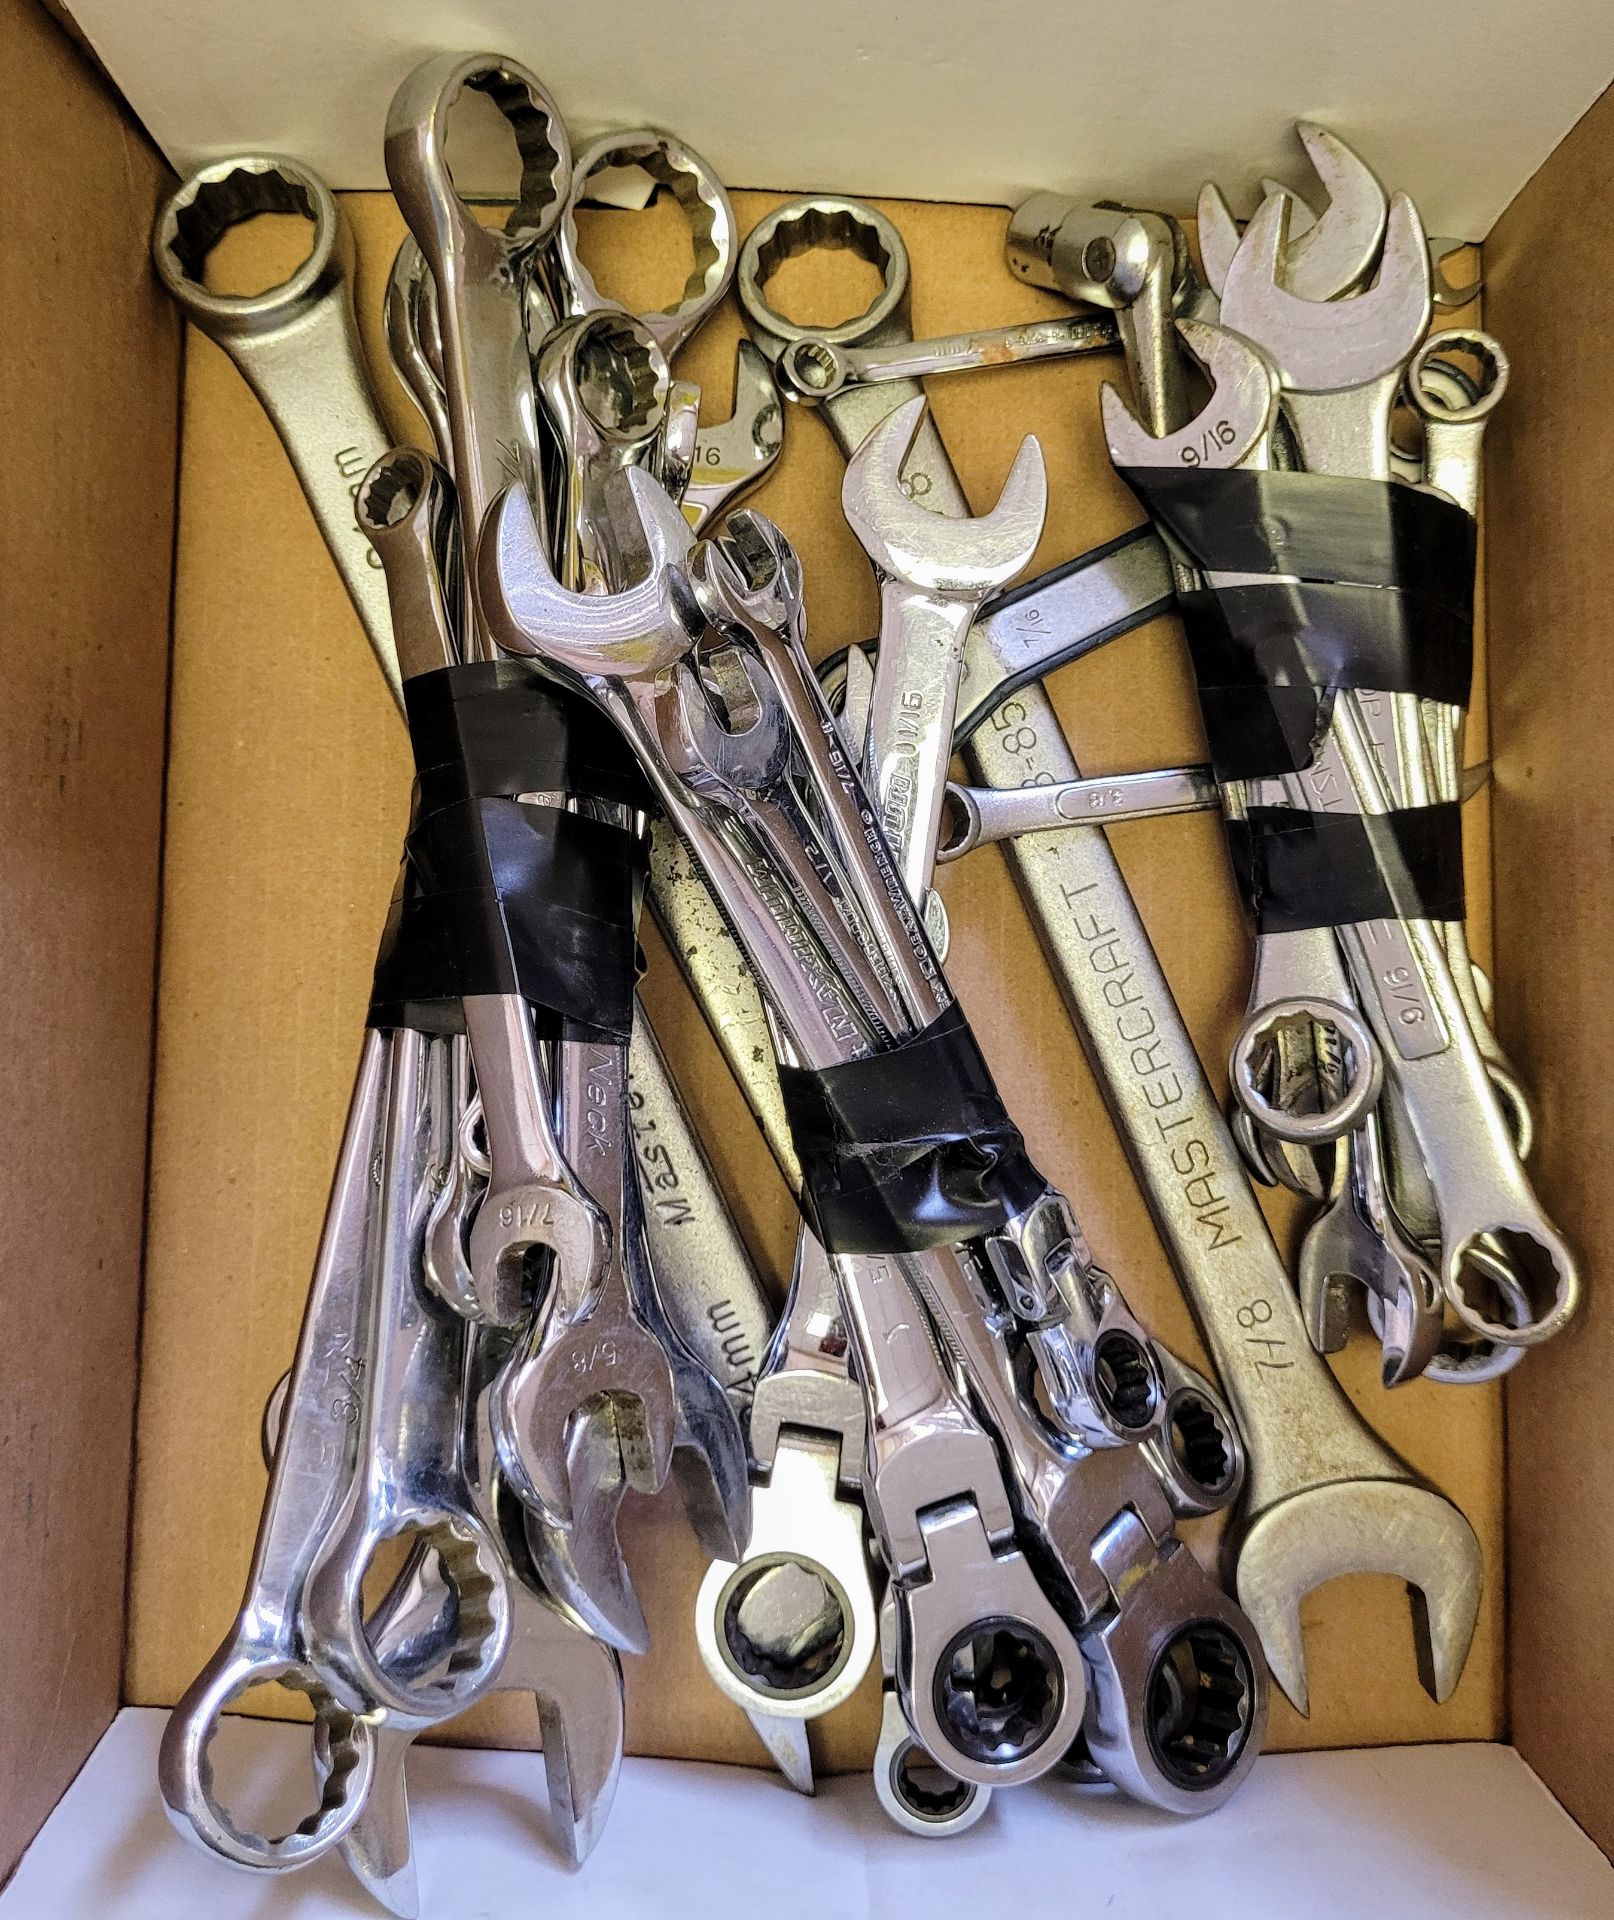 LOT - STANLEY SOCKET SET AND ASSORTED WRENCHES - Image 6 of 6